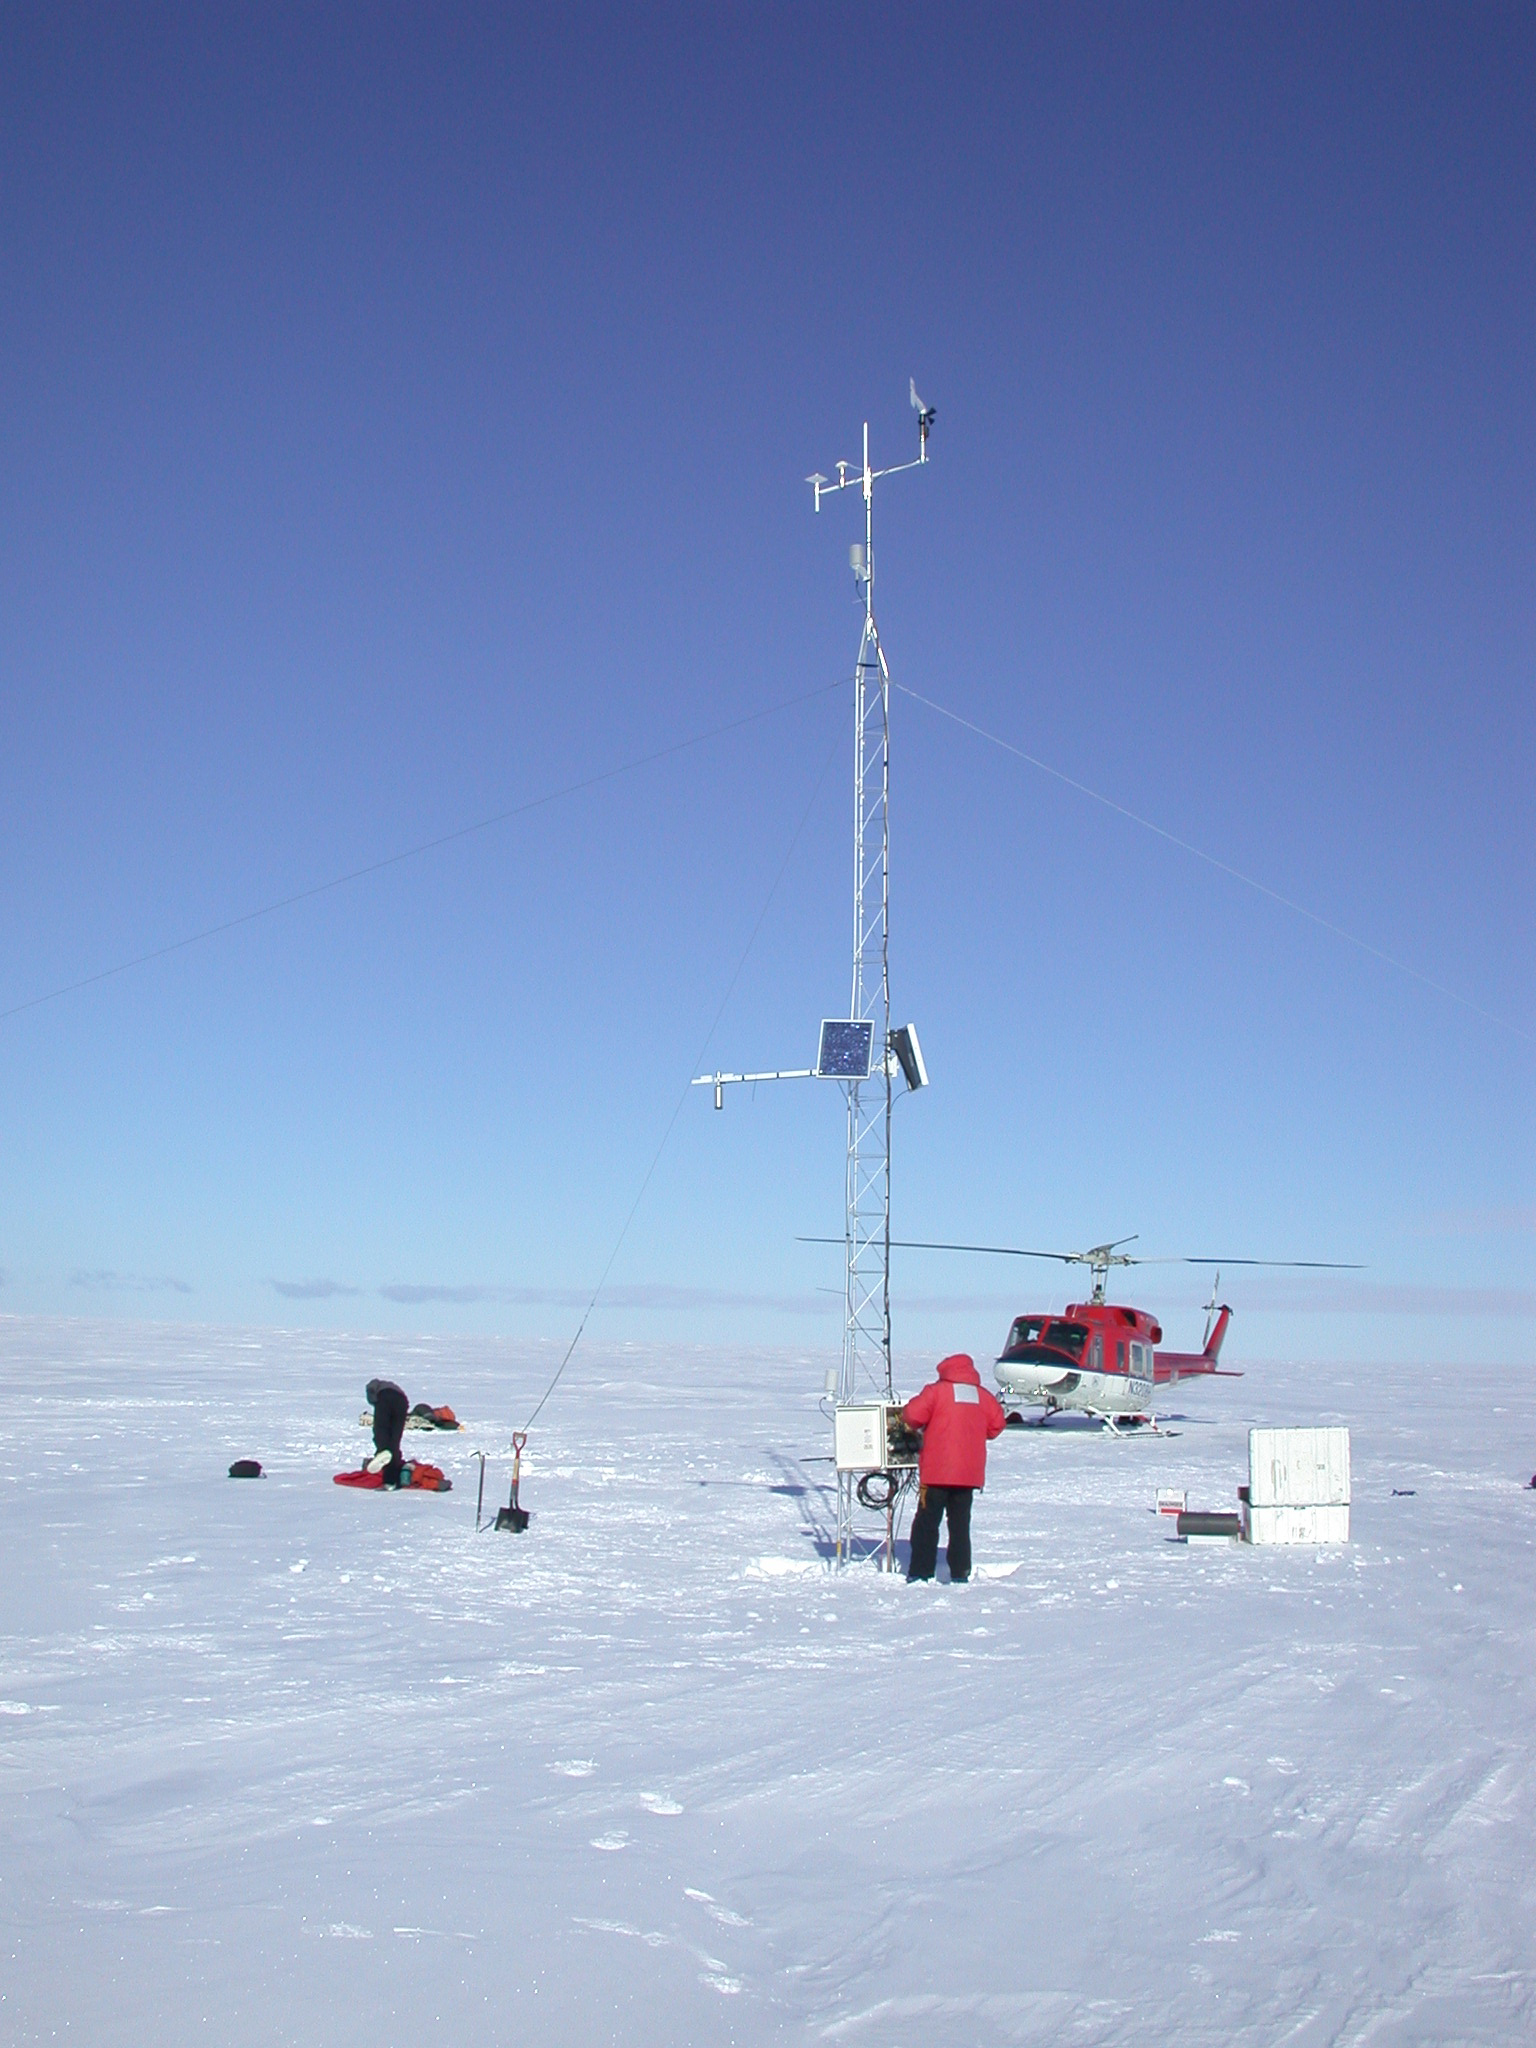 Scientific equipment and a helicopter on snow.